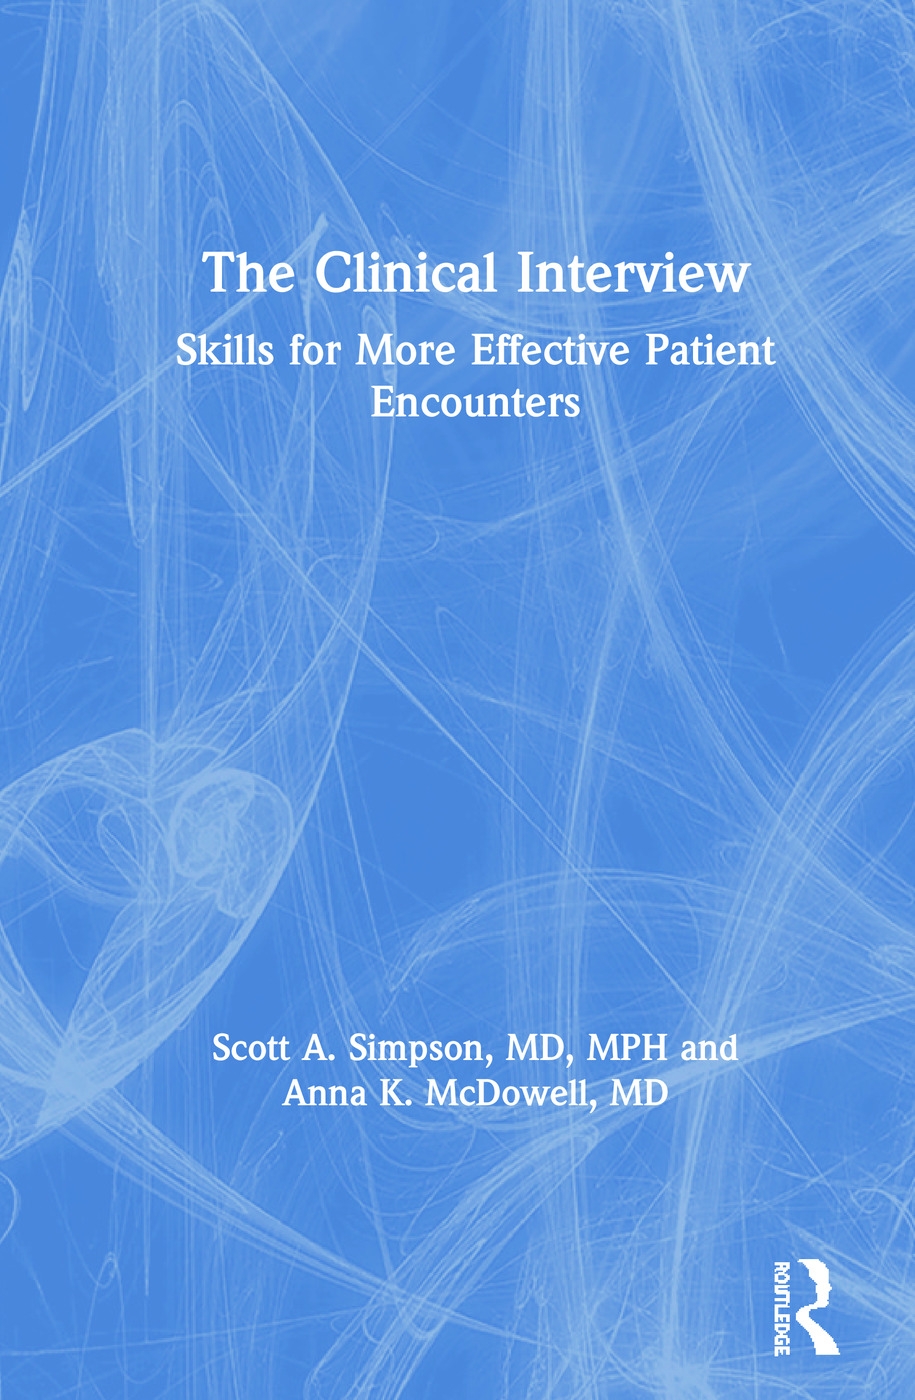 The Clinical Interview: Skills for More Effective Patient Encounters